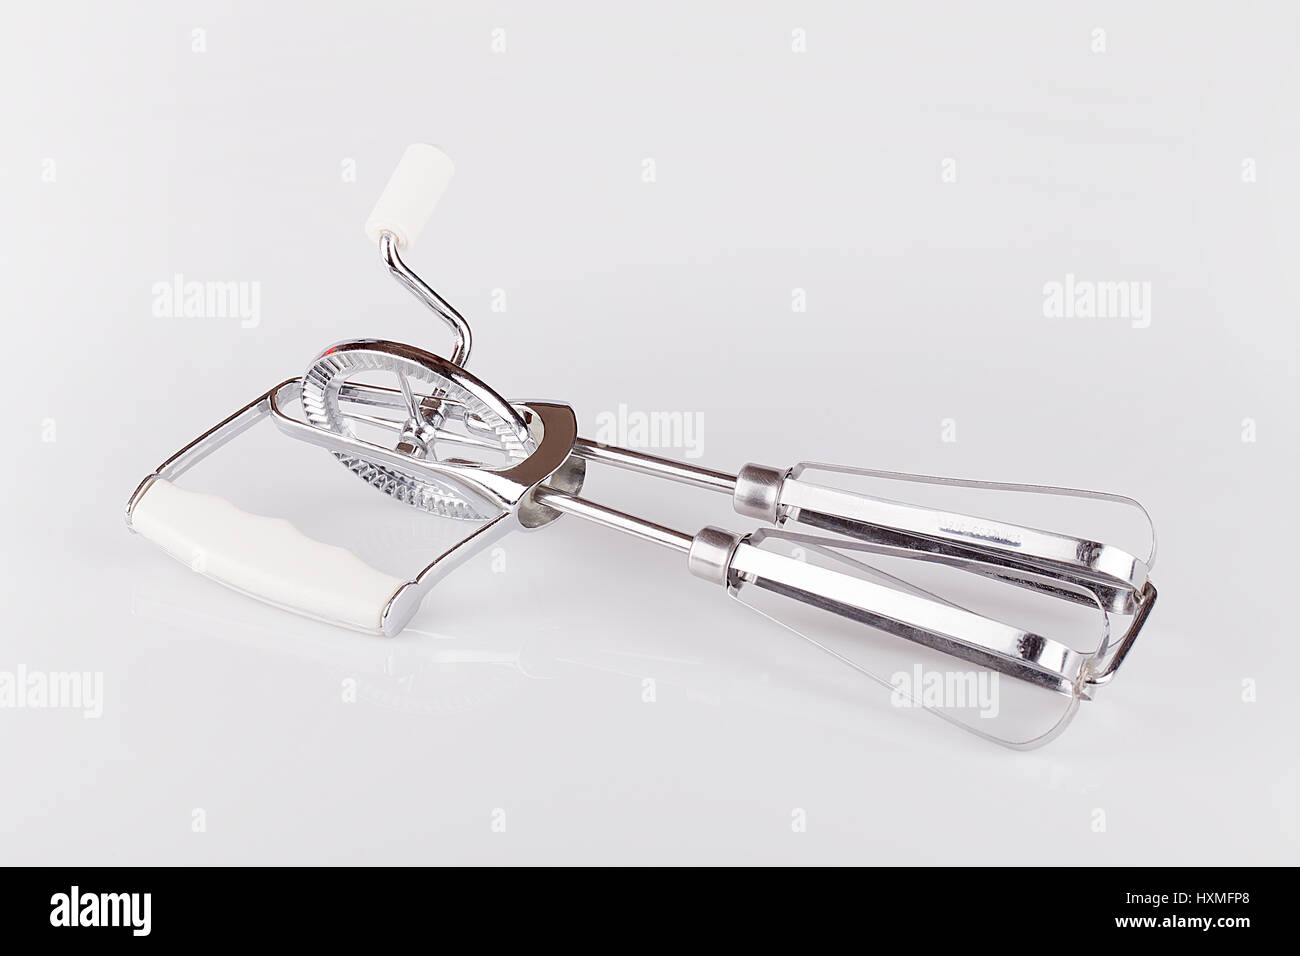 https://c8.alamy.com/comp/HXMFP8/hand-mixer-on-a-white-surface-manual-egg-beater-isolated-on-white-HXMFP8.jpg